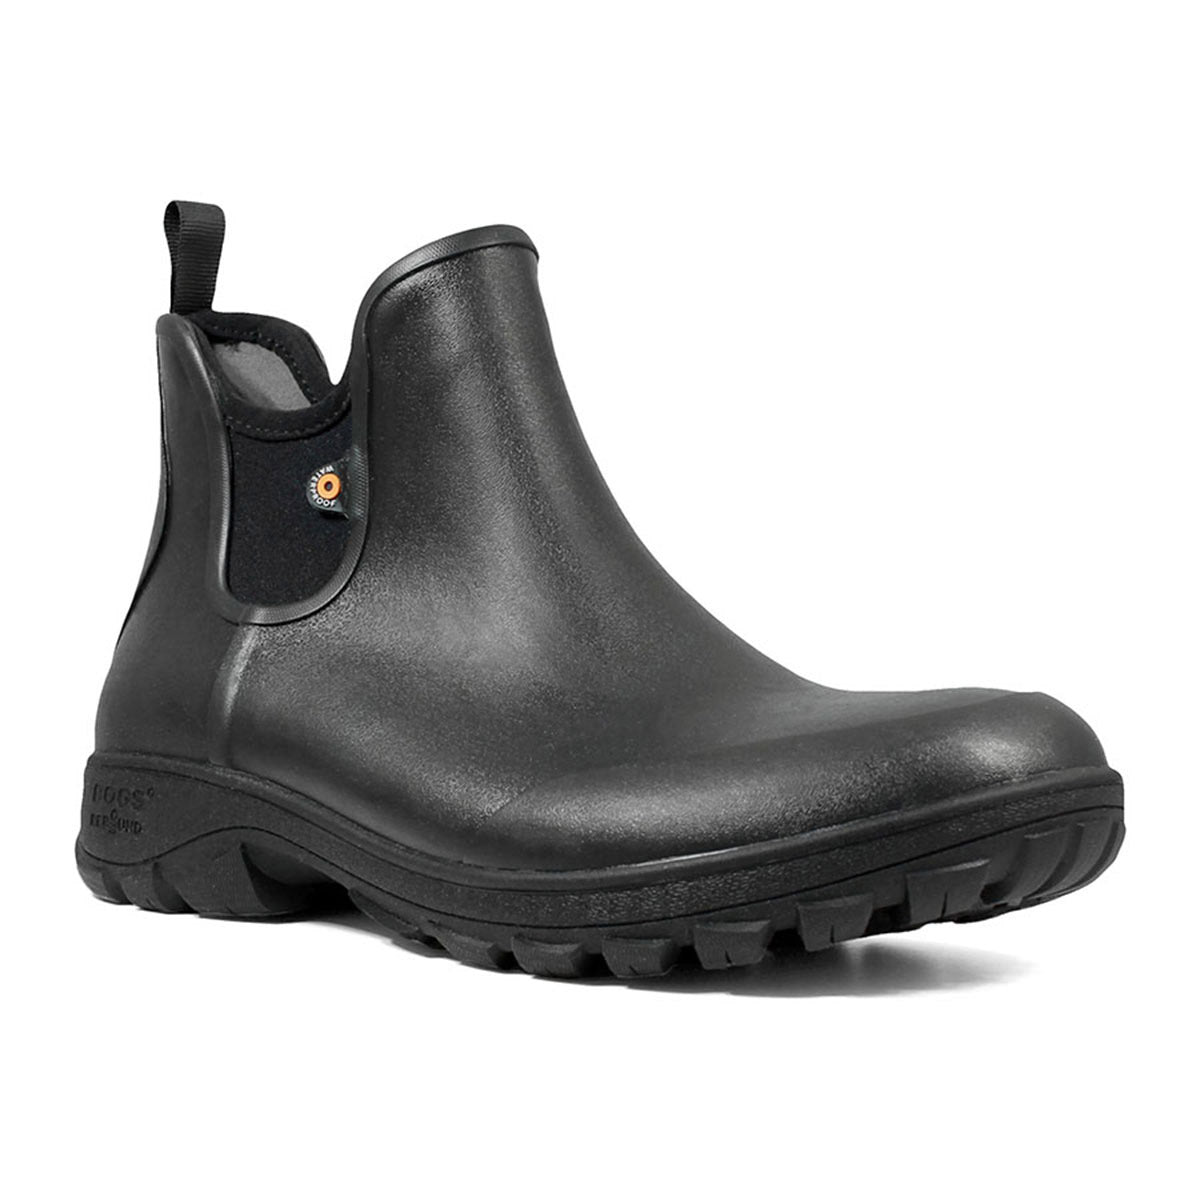 A black, waterproof ankle boot with elastic side panels and a BioGrip slip-resistant outsole - Bogs Sauvie Slip On Black.